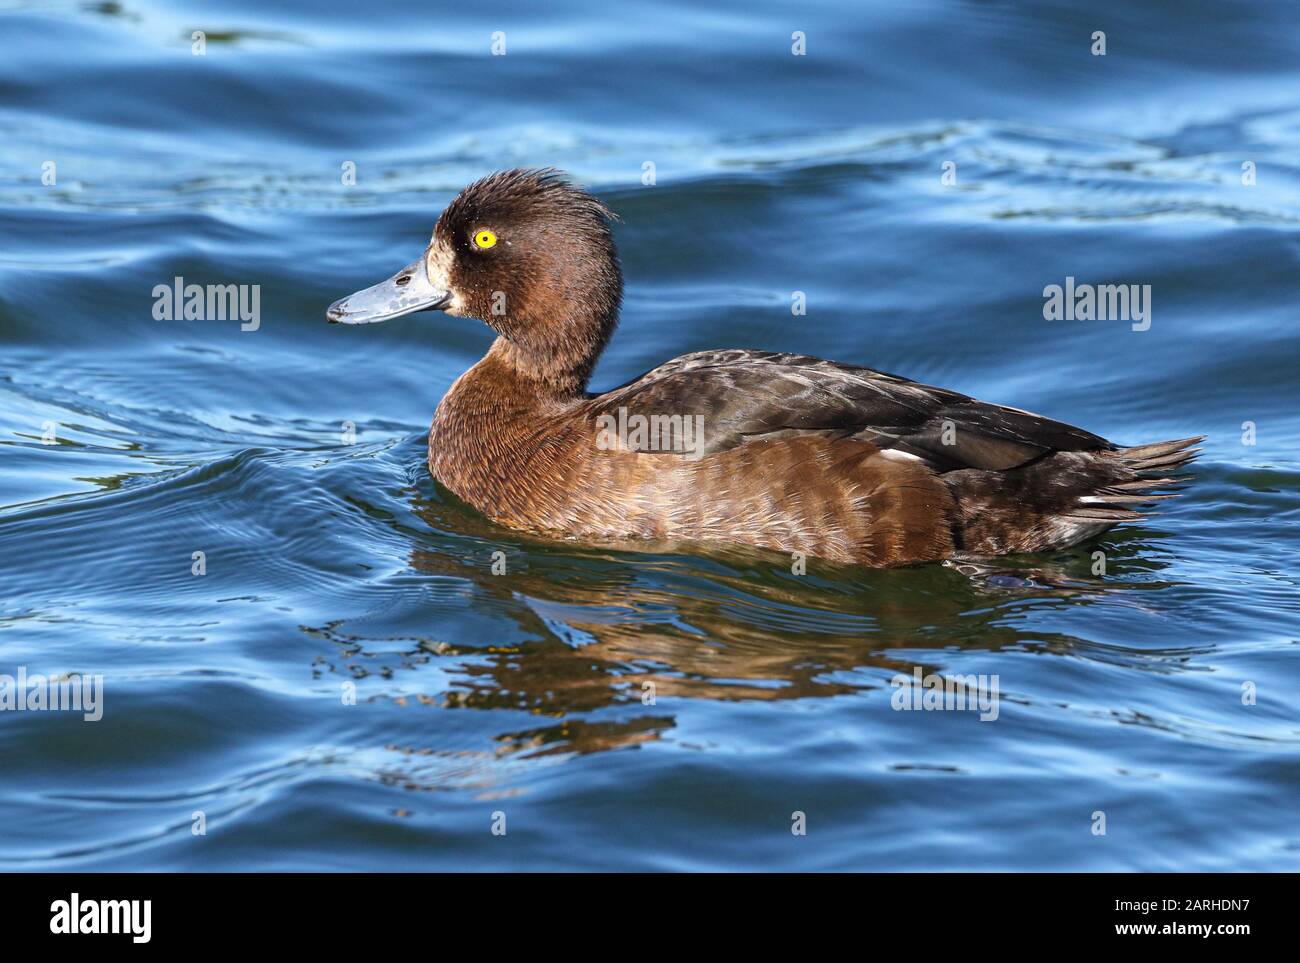 The female tufted duck (Aythya fuligula) swims on the Dieksee, Germany. There are currently this type of duck. The trend is increasing. Stock Photo